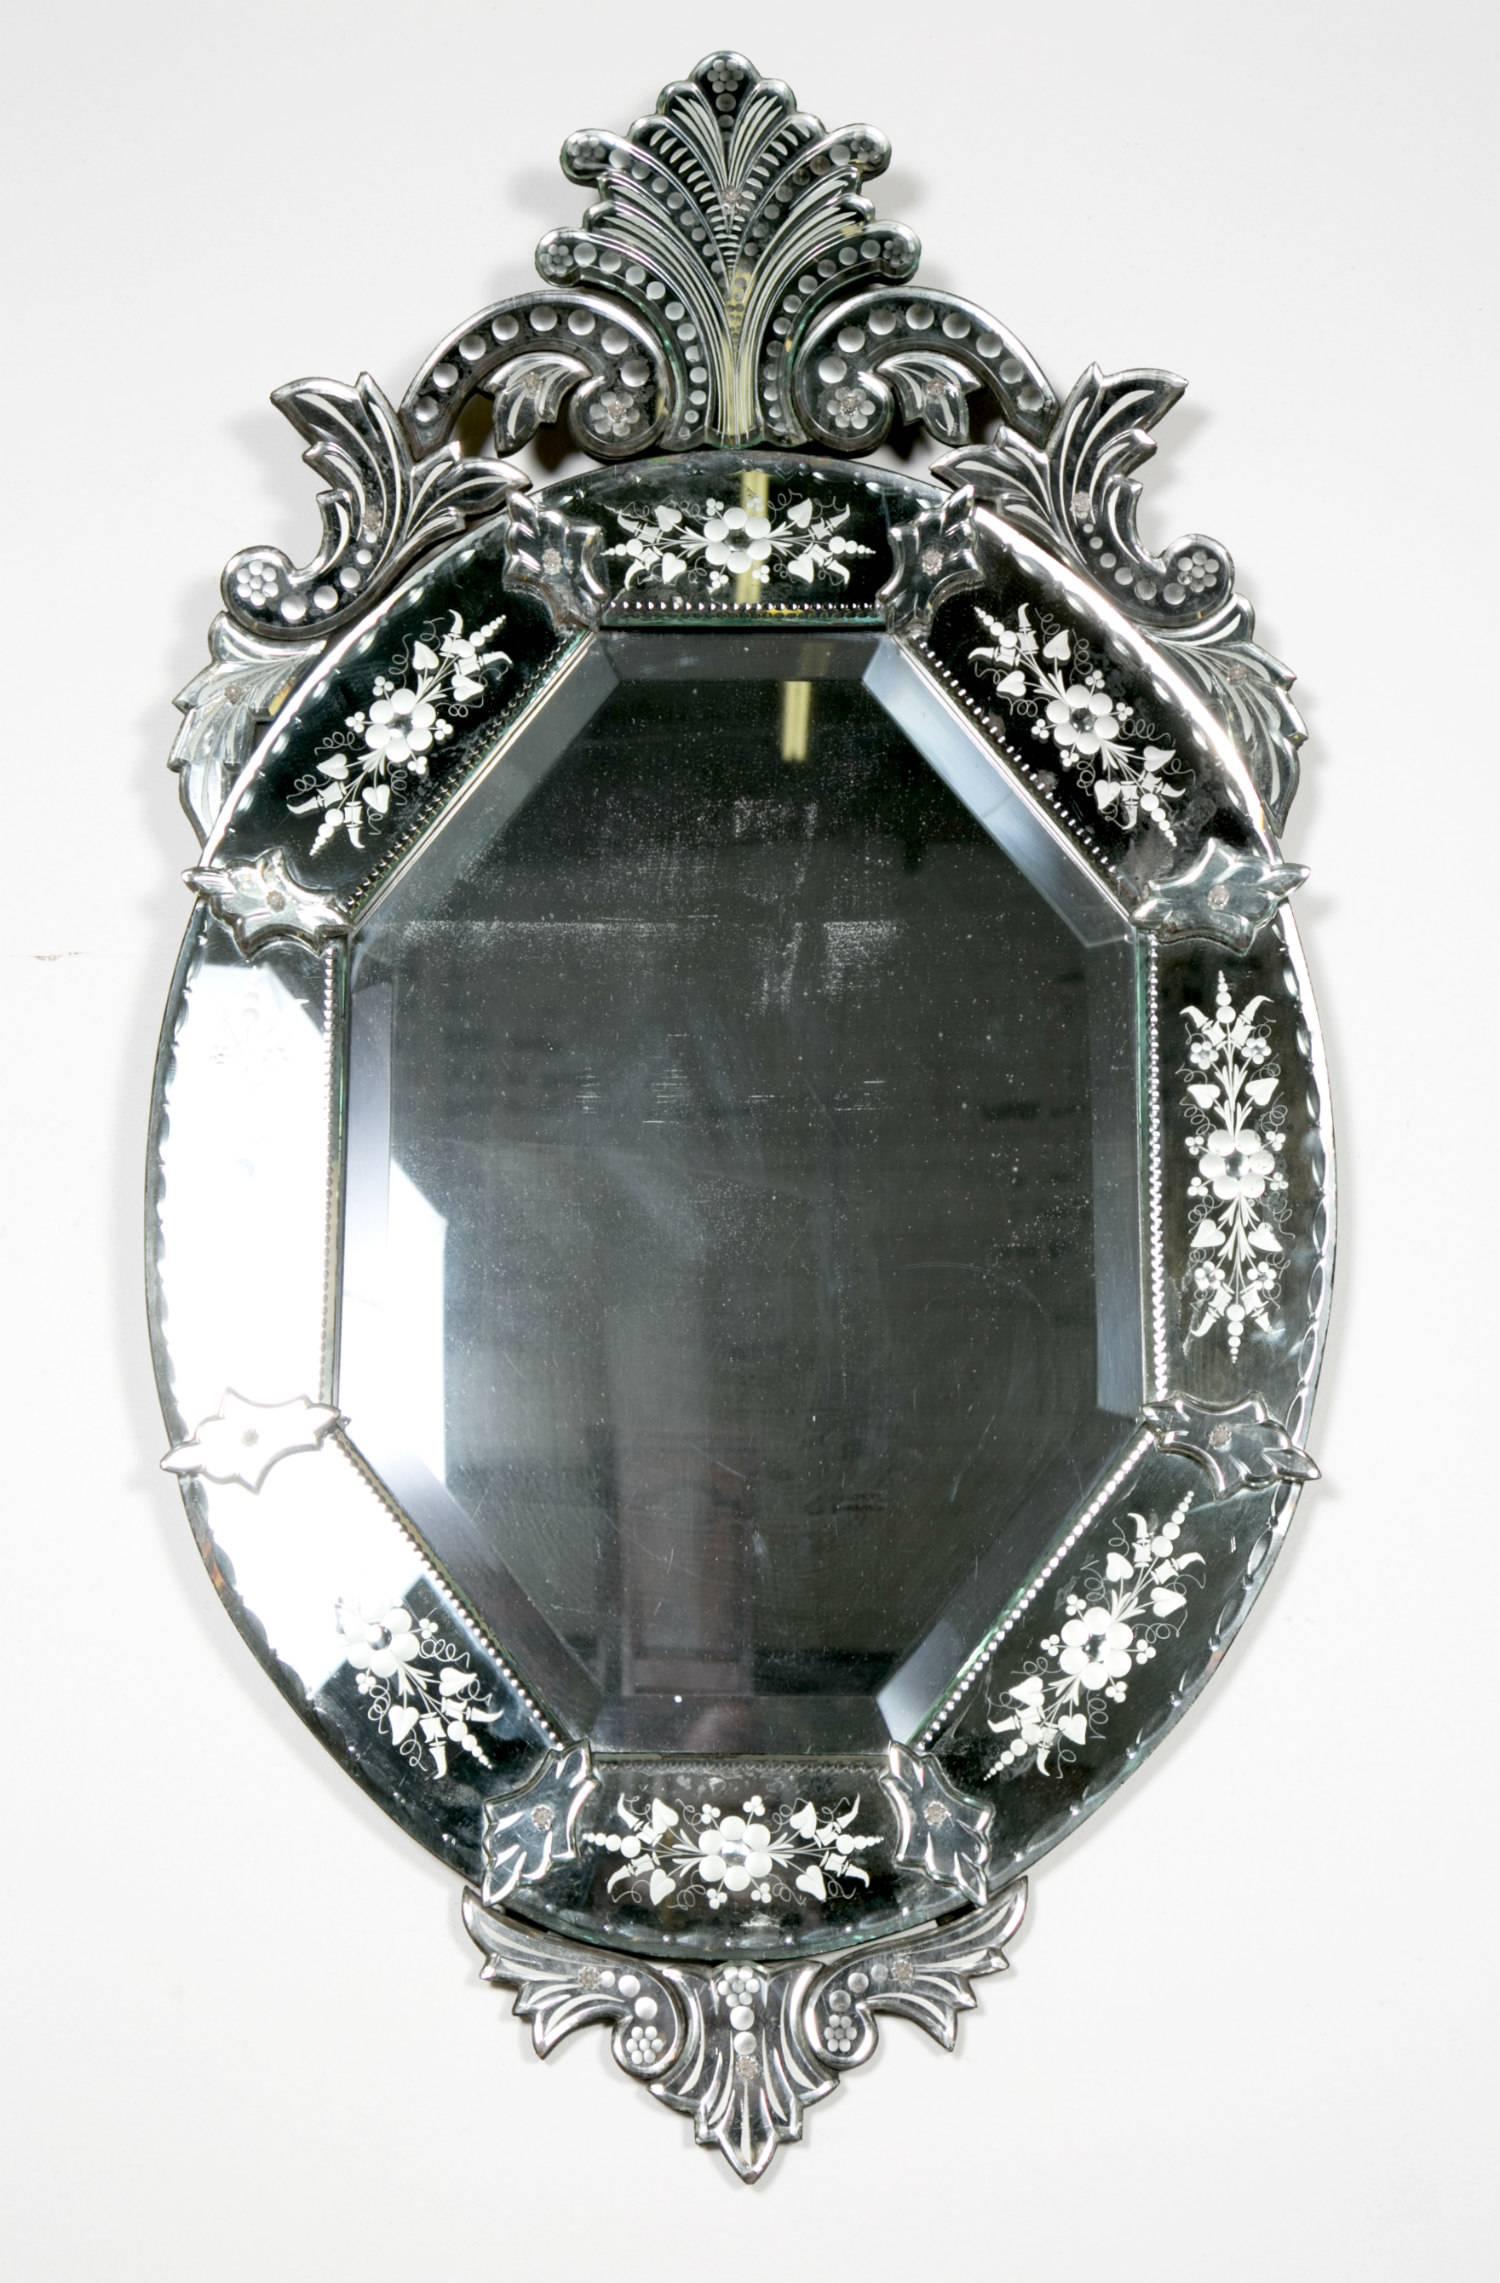 A beautiful oval shaped Venetian mirror, circa early 1900s, with pierced glass pediment top, having original beveled mirror plates and engraved mirrored border sections secured with pins shaped as florets.

 